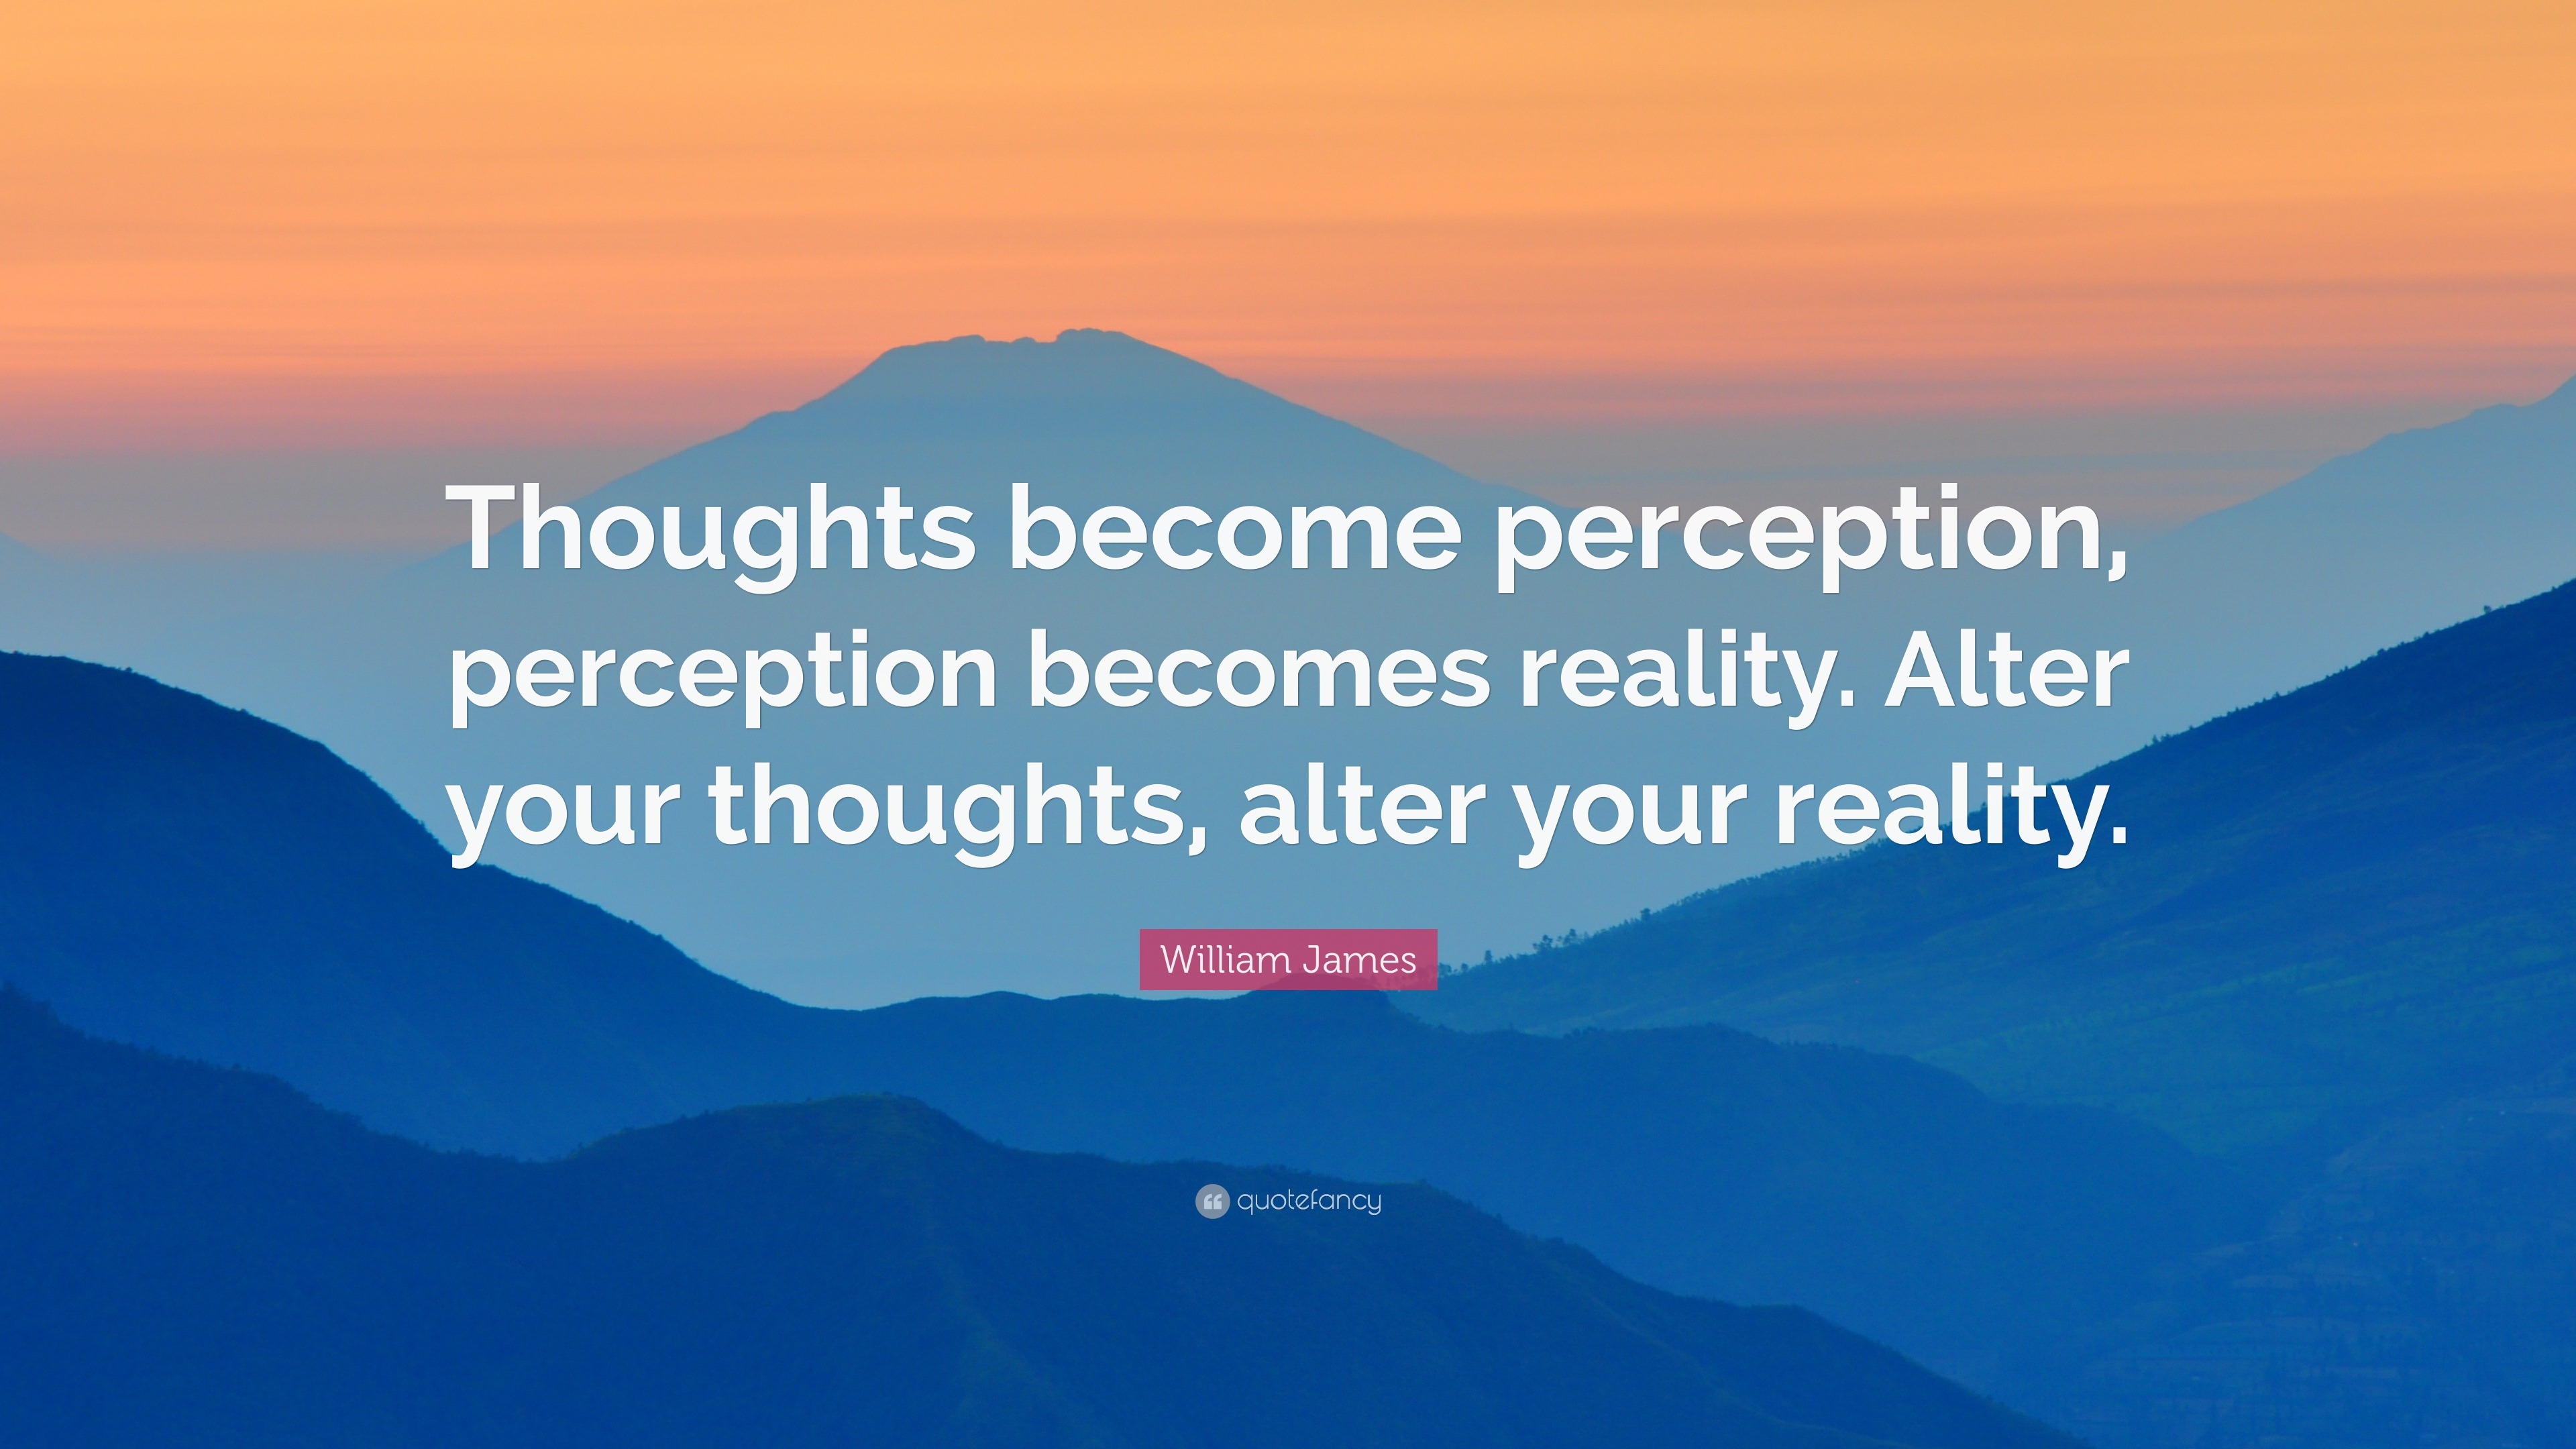 William James Quote “Thoughts perception